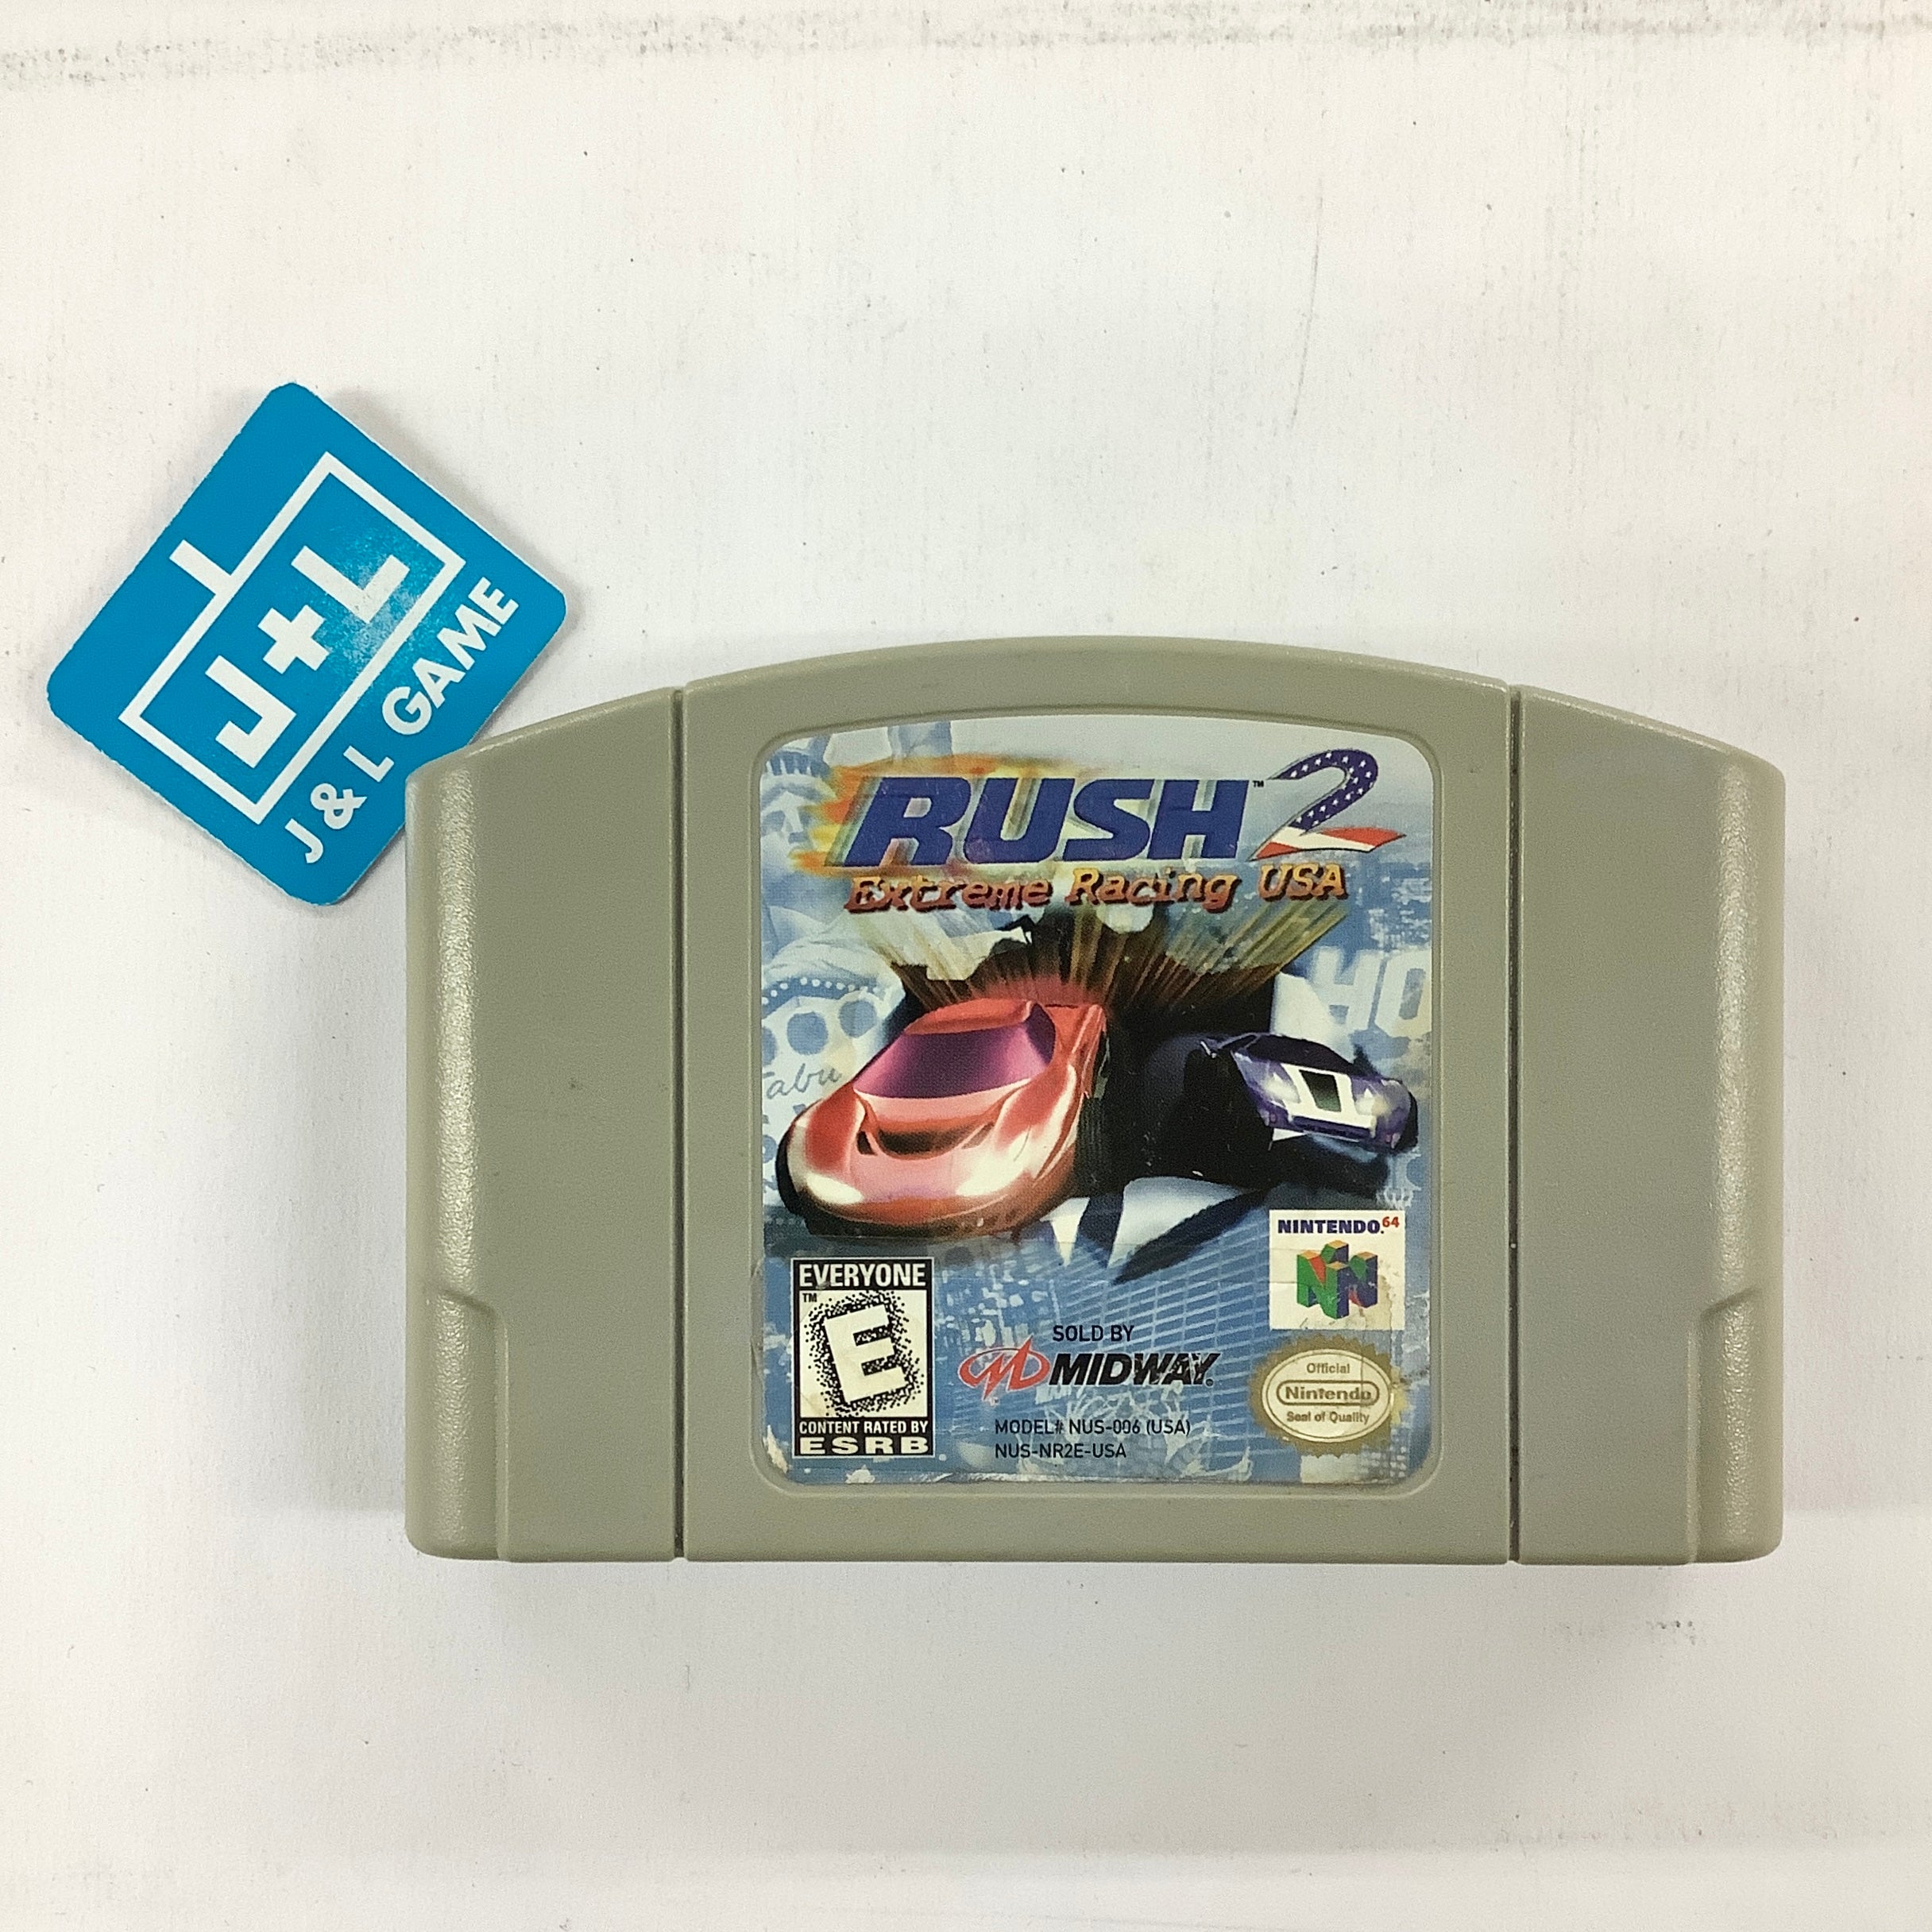 Rush 2: Extreme Racing USA - (N64) Nintendo 64 [Pre-Owned] Video Games Midway   